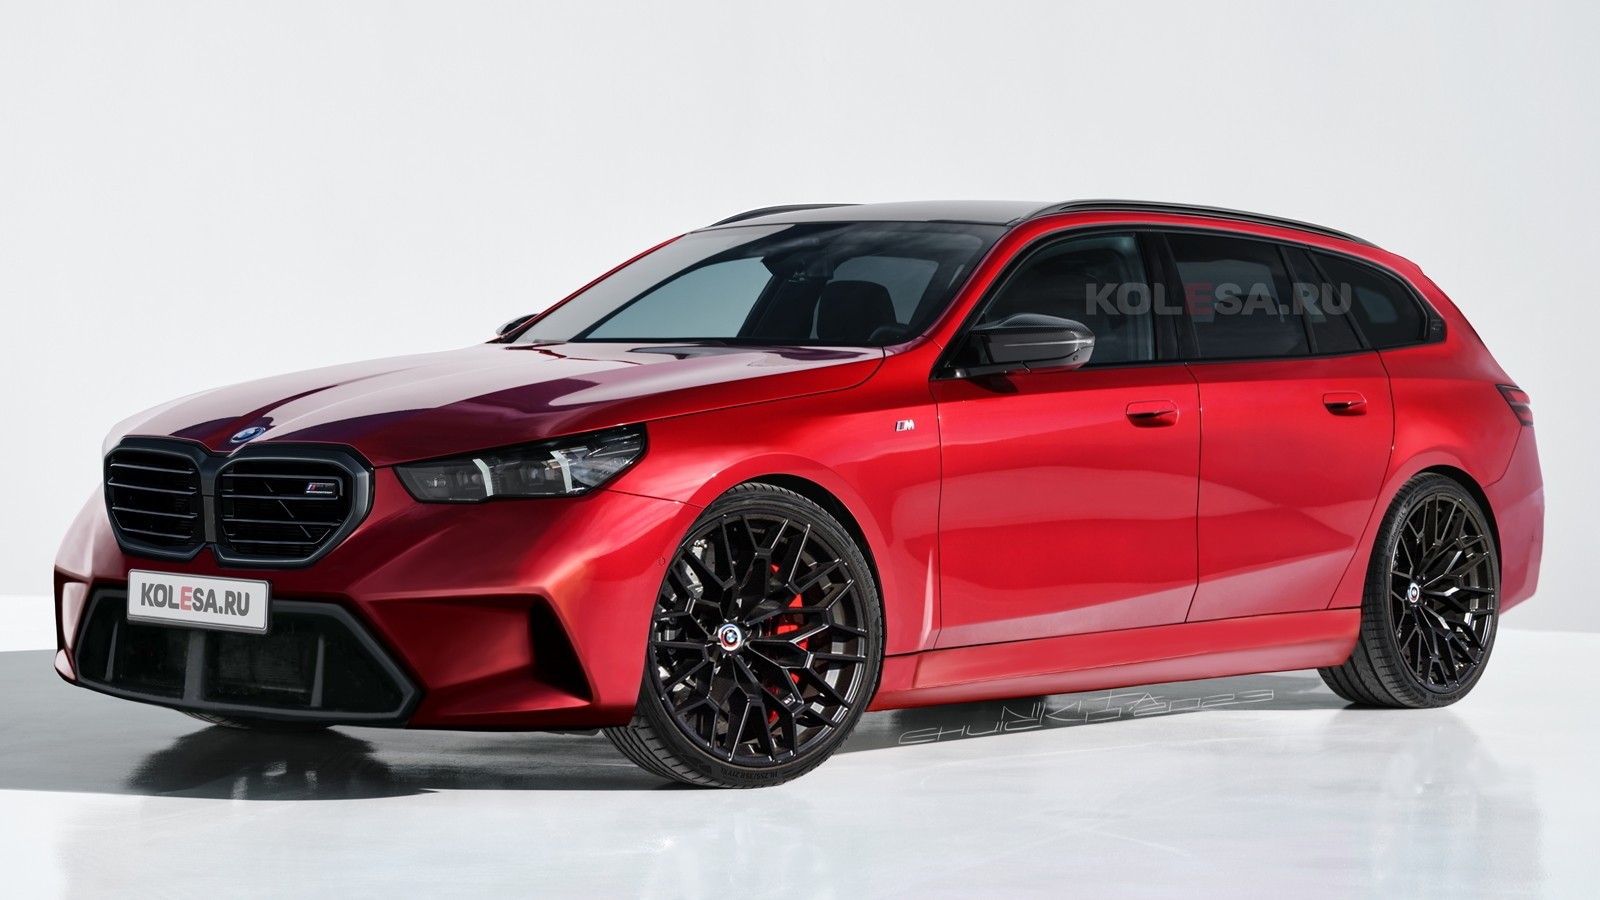 2025 BMW M5 Touring Everything We Know About the New Audi RS 6 Avant